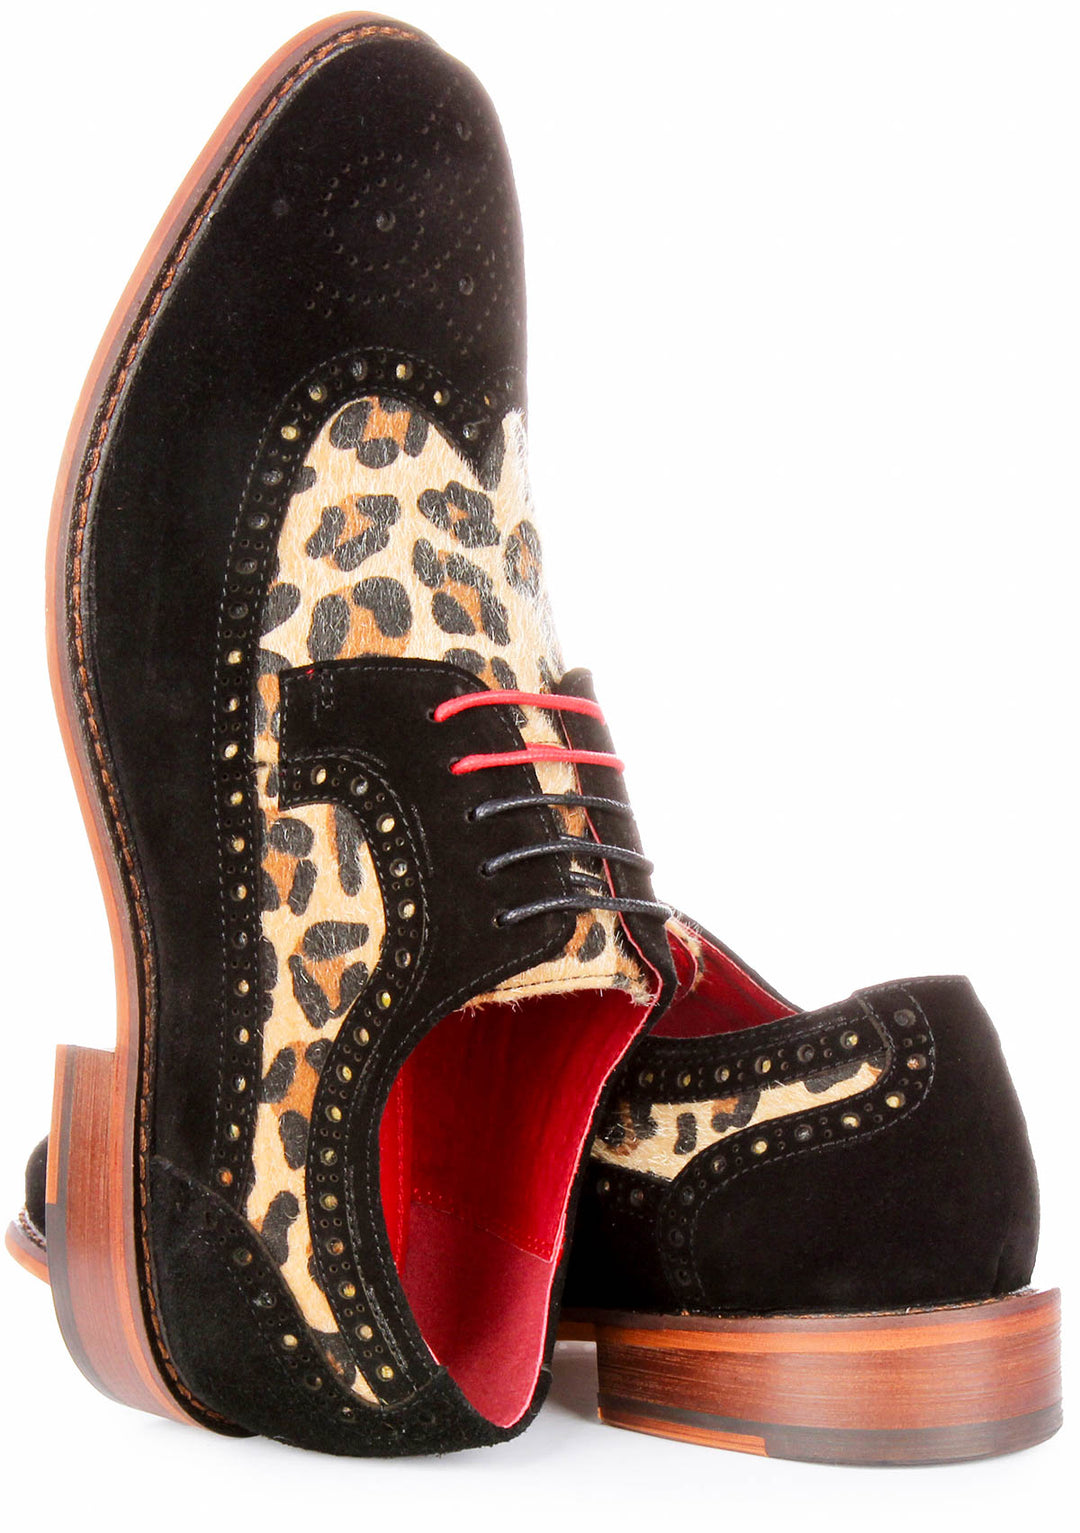 Mateo Brogues Shoes In Leopard